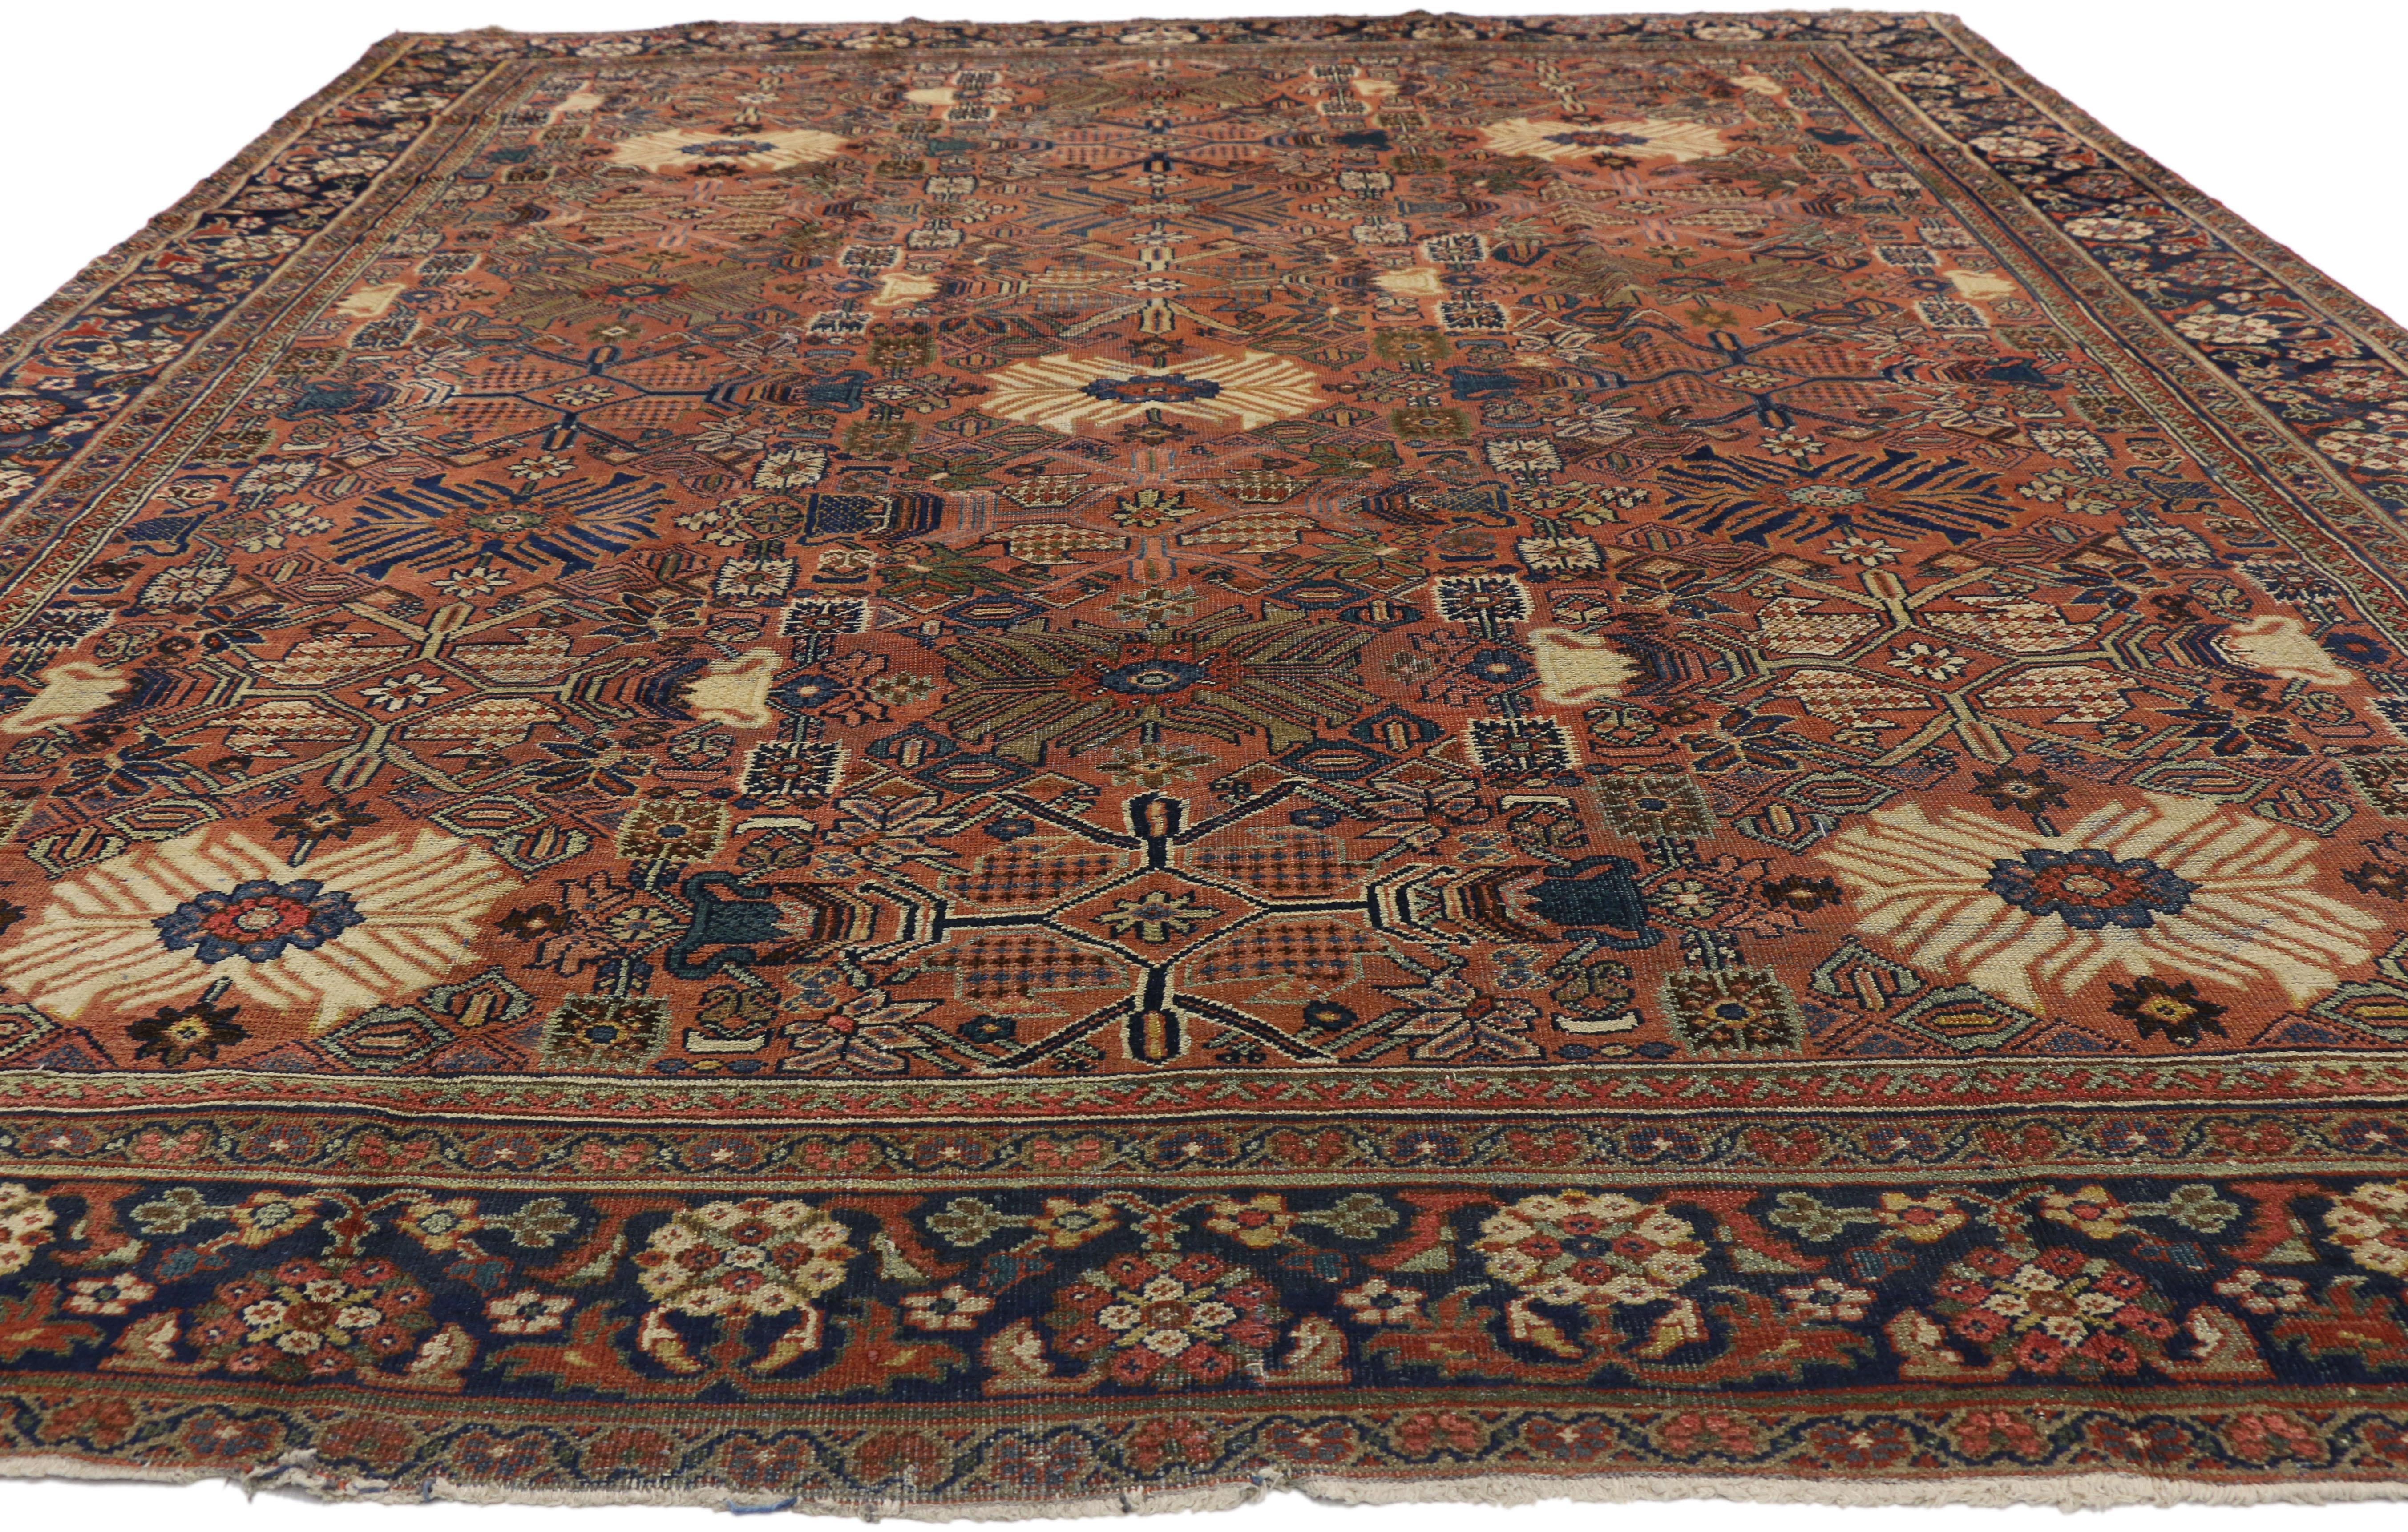 Hand-Knotted Antique Persian Mahal Rug with Rustic Arts and Crafts Style